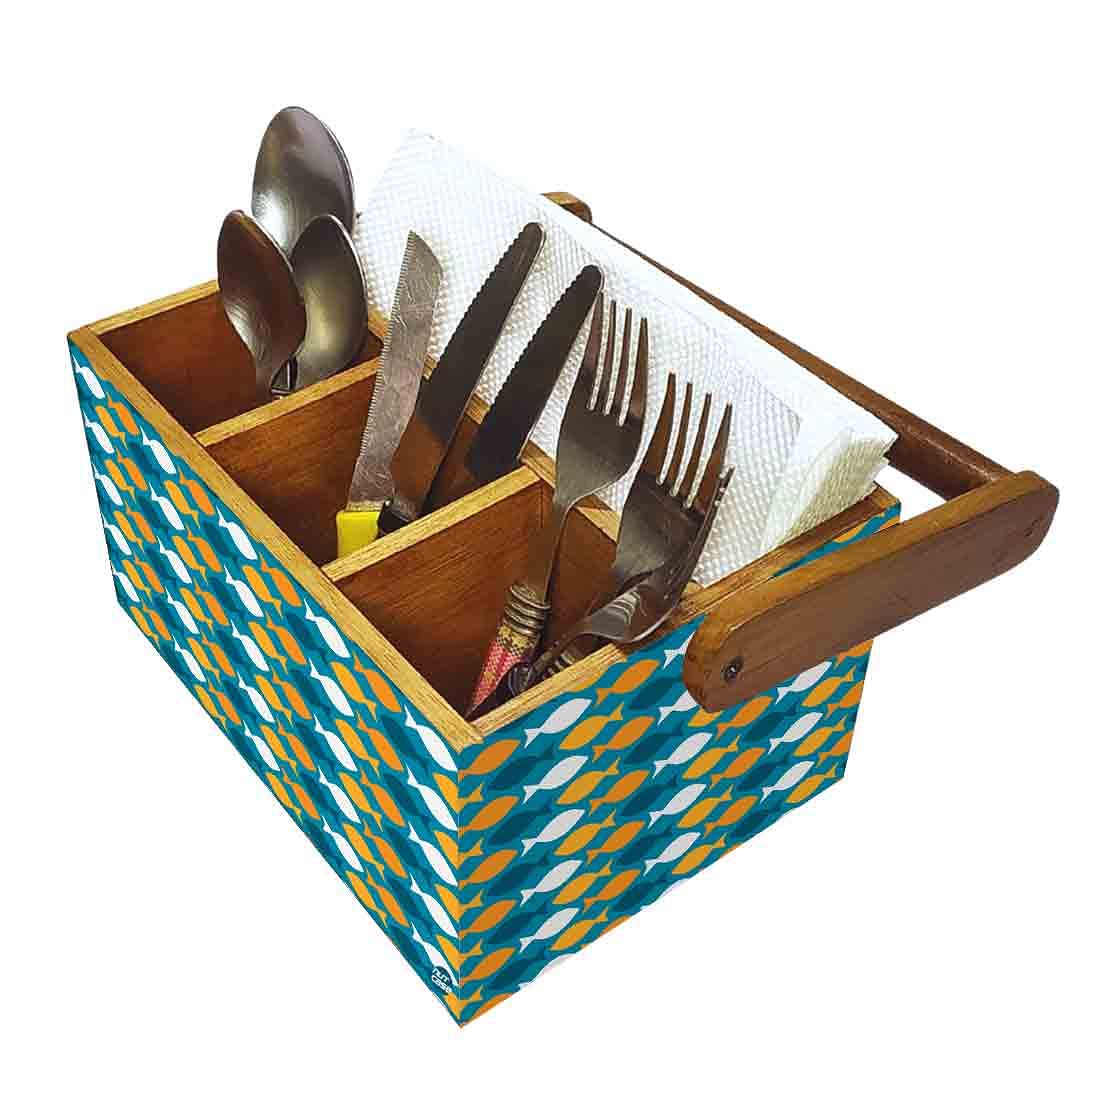 Cutlery Holder Cafe With Handle Forks Spoons Tissue Organizer - Fishes Nutcase